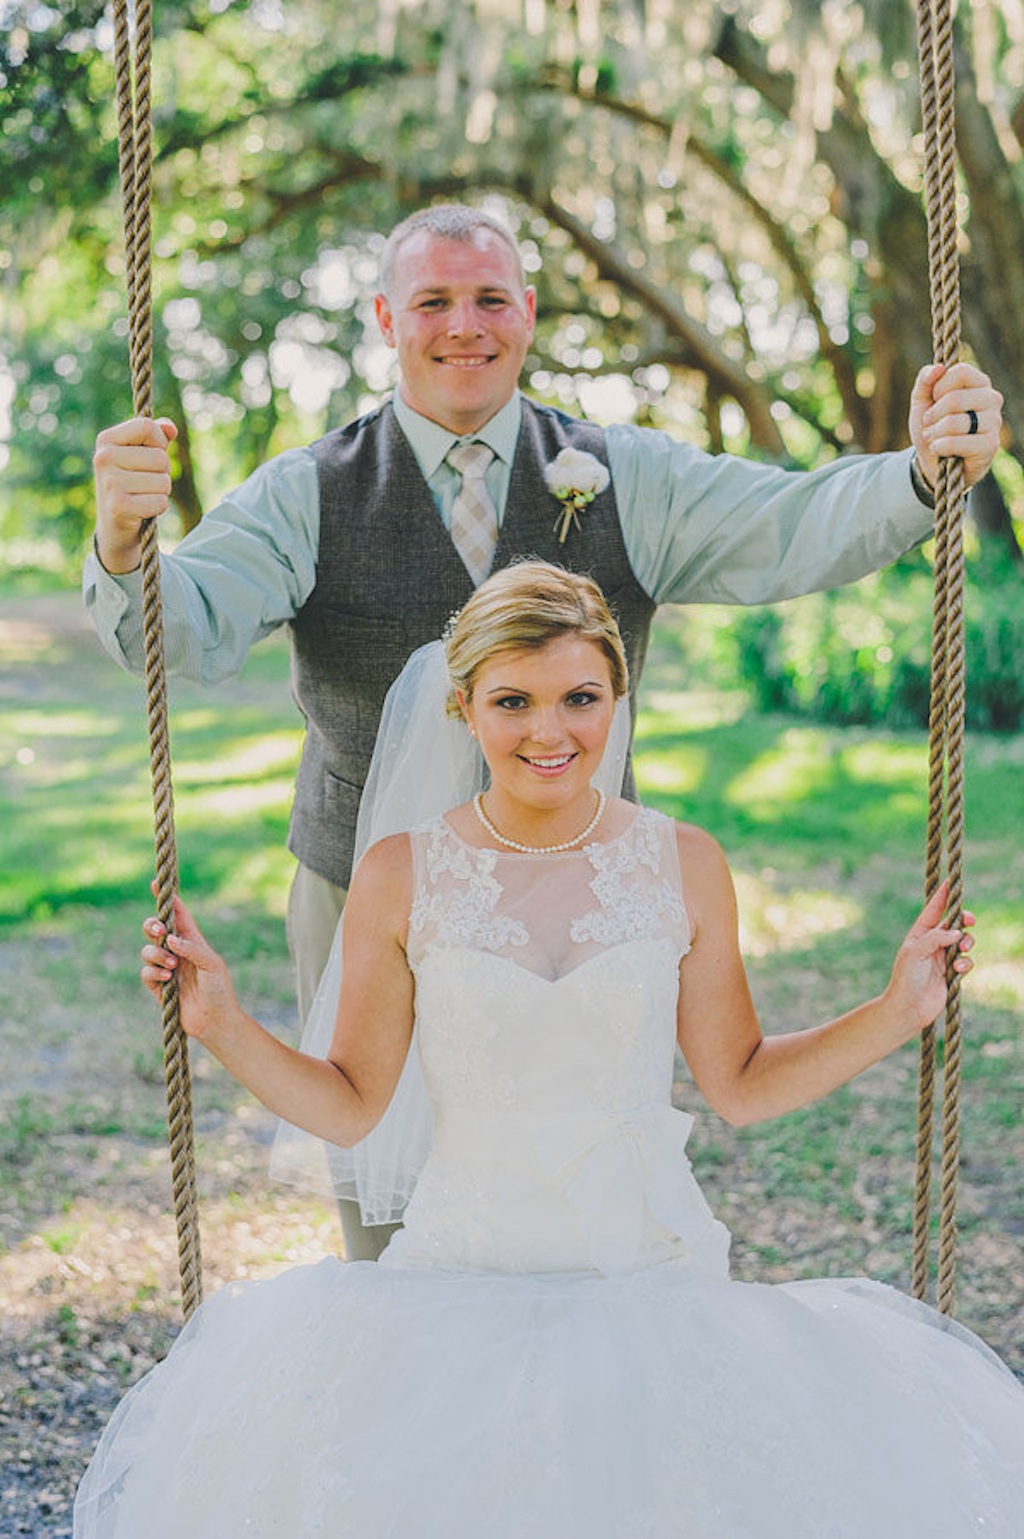 Country Rustic Bride & Groom on Swing on Wedding Day | Regina as the Photographer